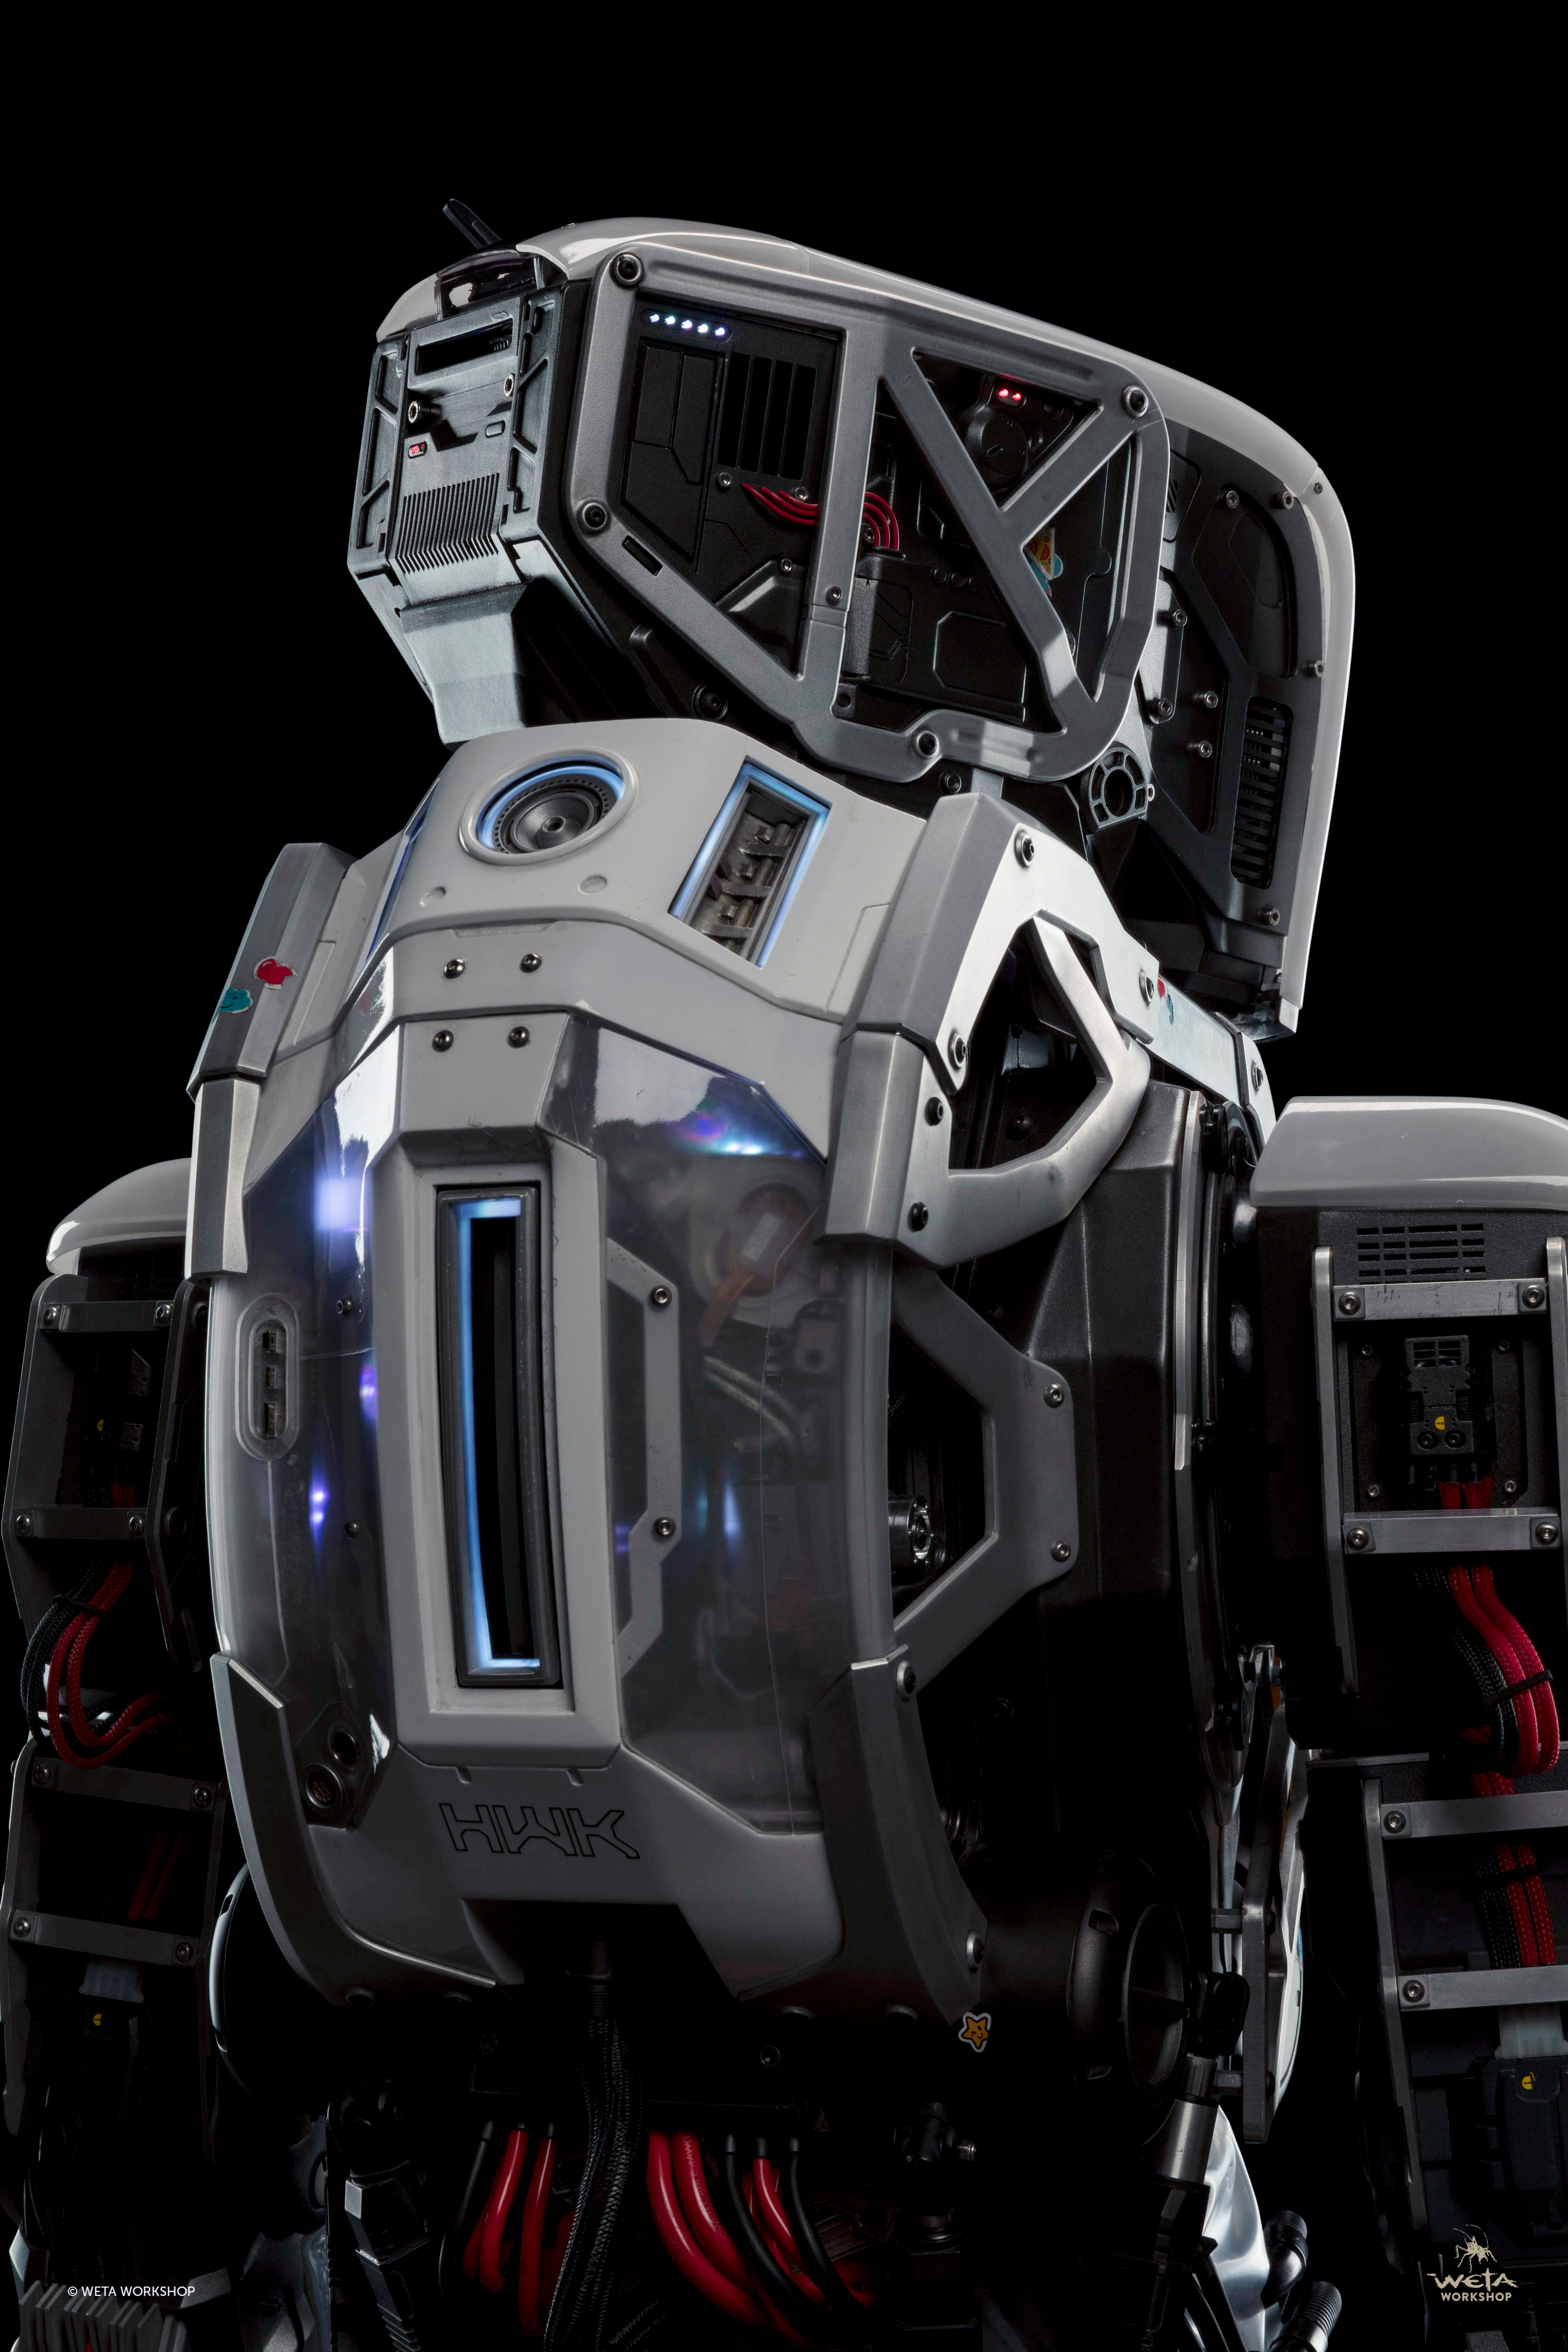 I Am Mother: Specialty robot suit